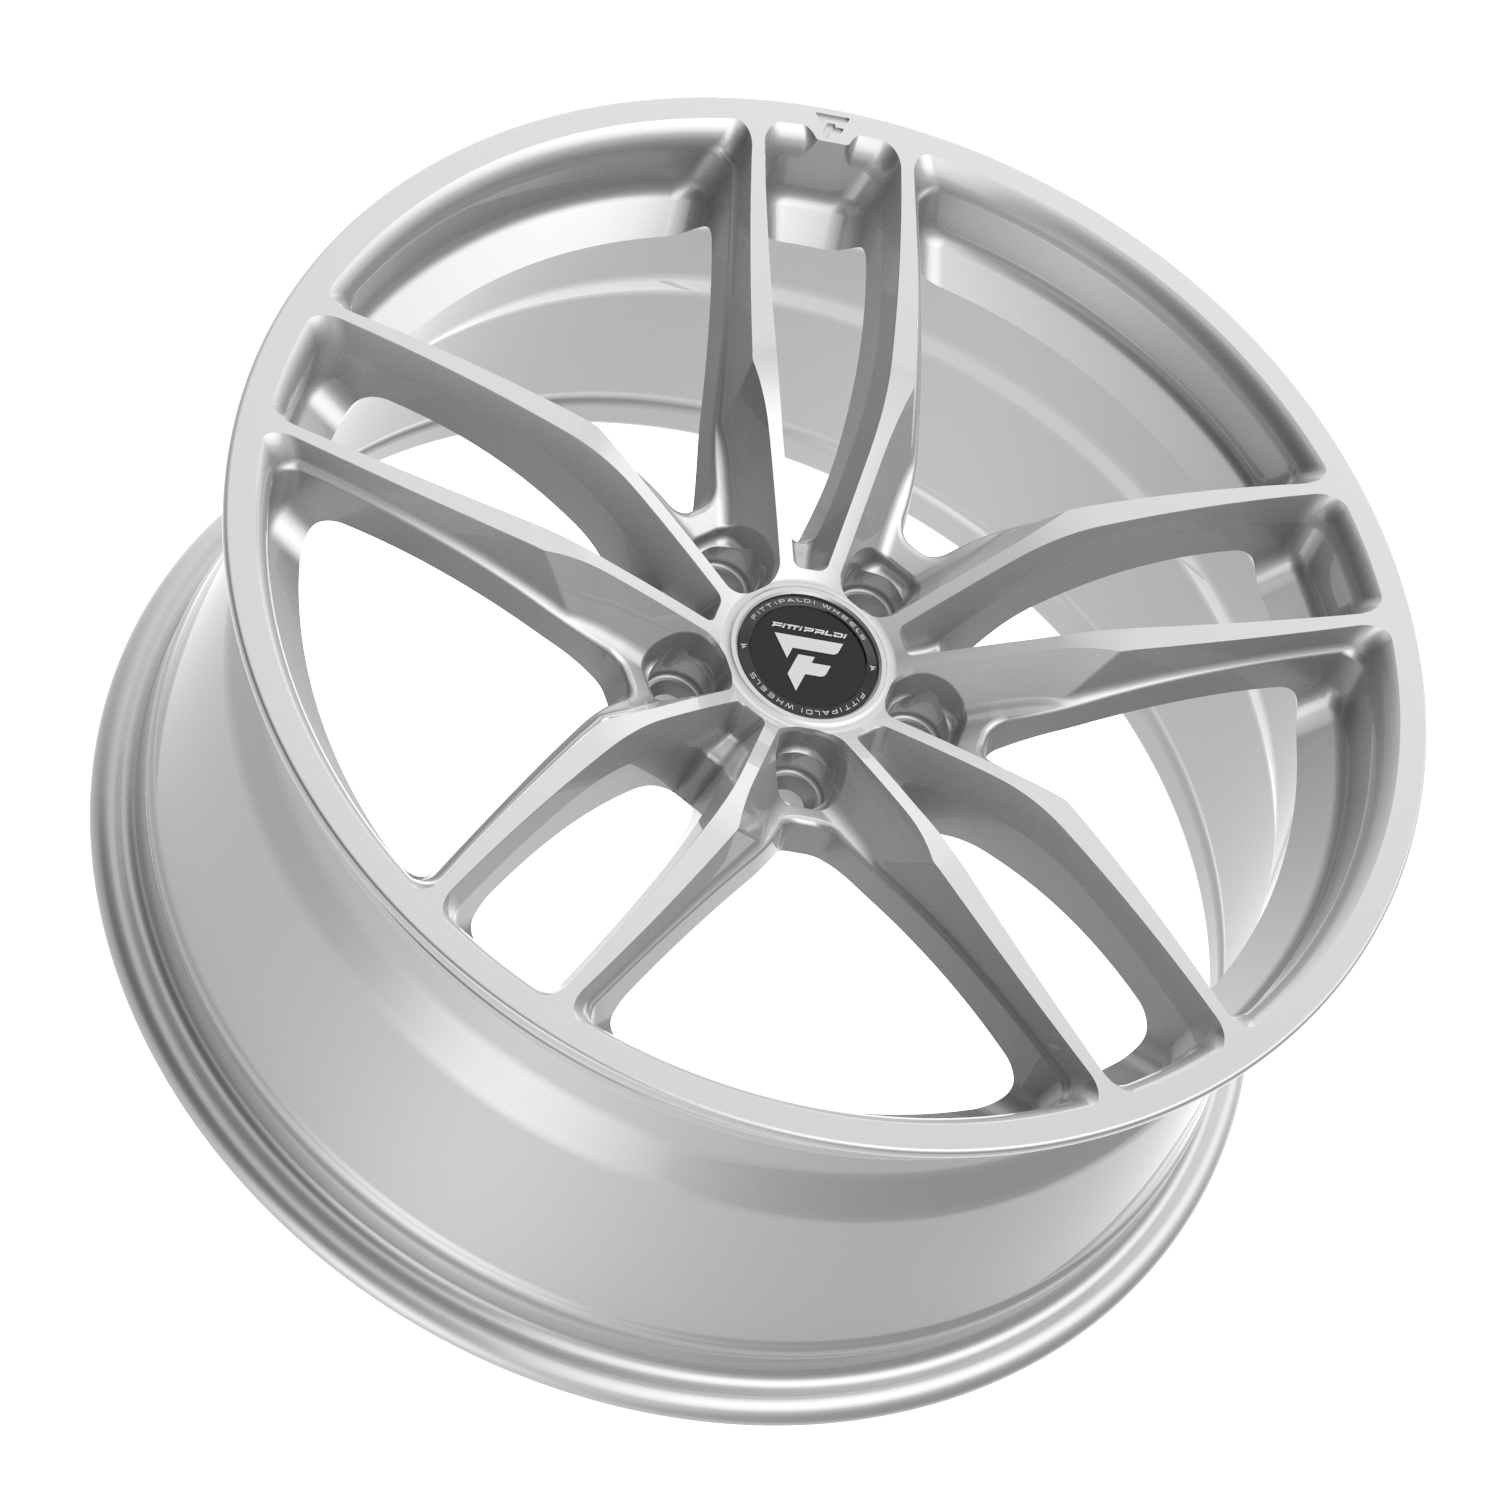 FITTIPALDI 361S 20X8.5 +32 5X120 Brushed Silver